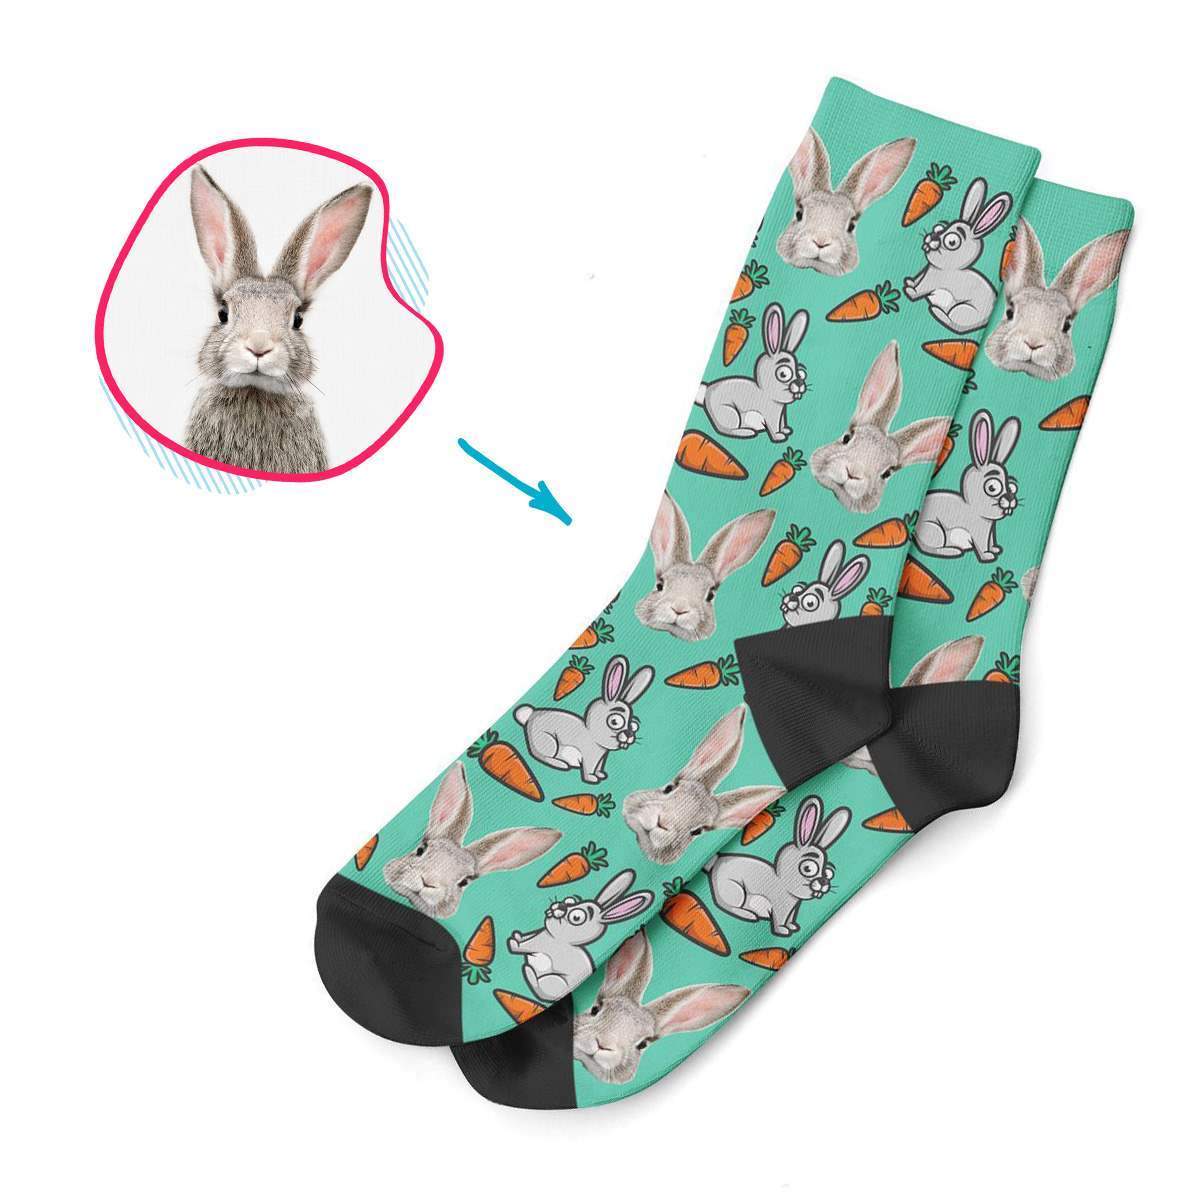 mint Bunny socks personalized with photo of face printed on them